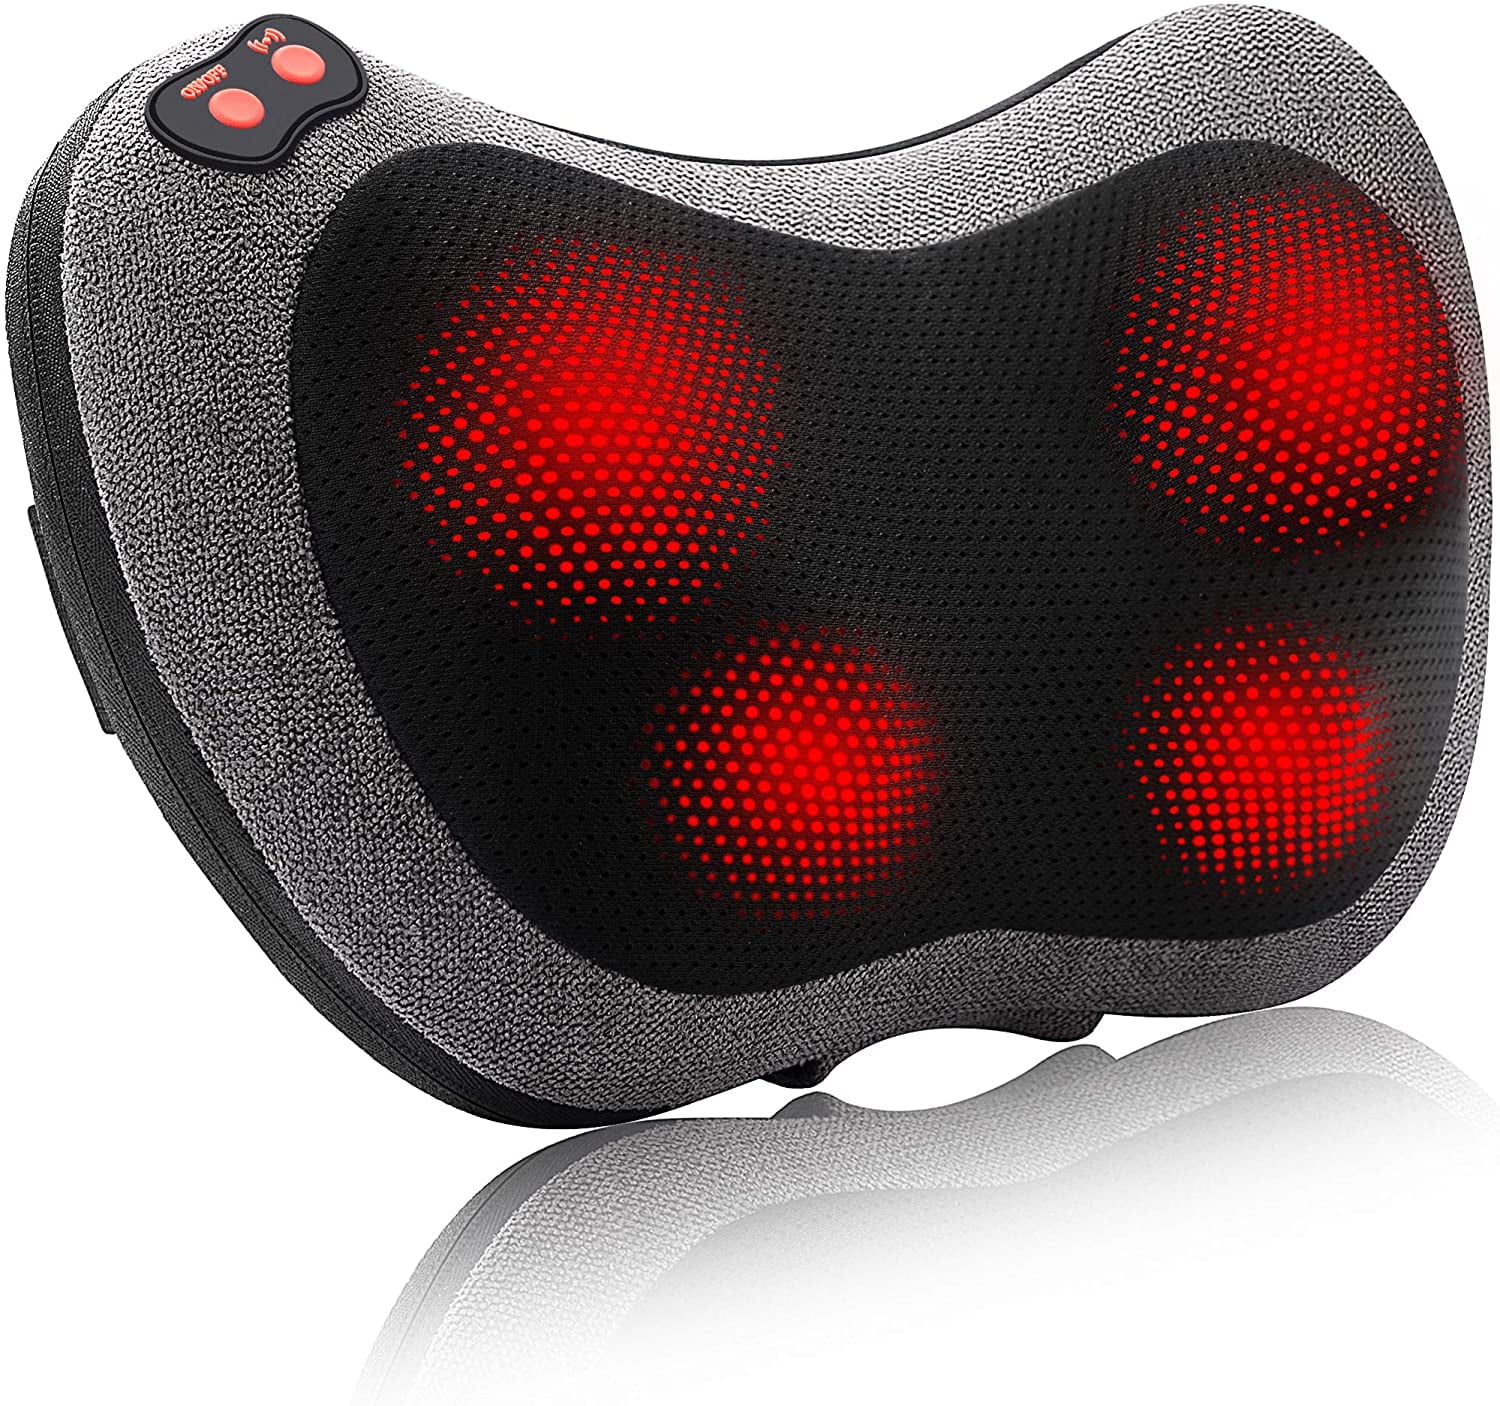 Belluxa Full Body Massager with Heat for pain relief Massage Machine for  Neck Back Shoulder Pillow Massager (BODY MASSGER) 